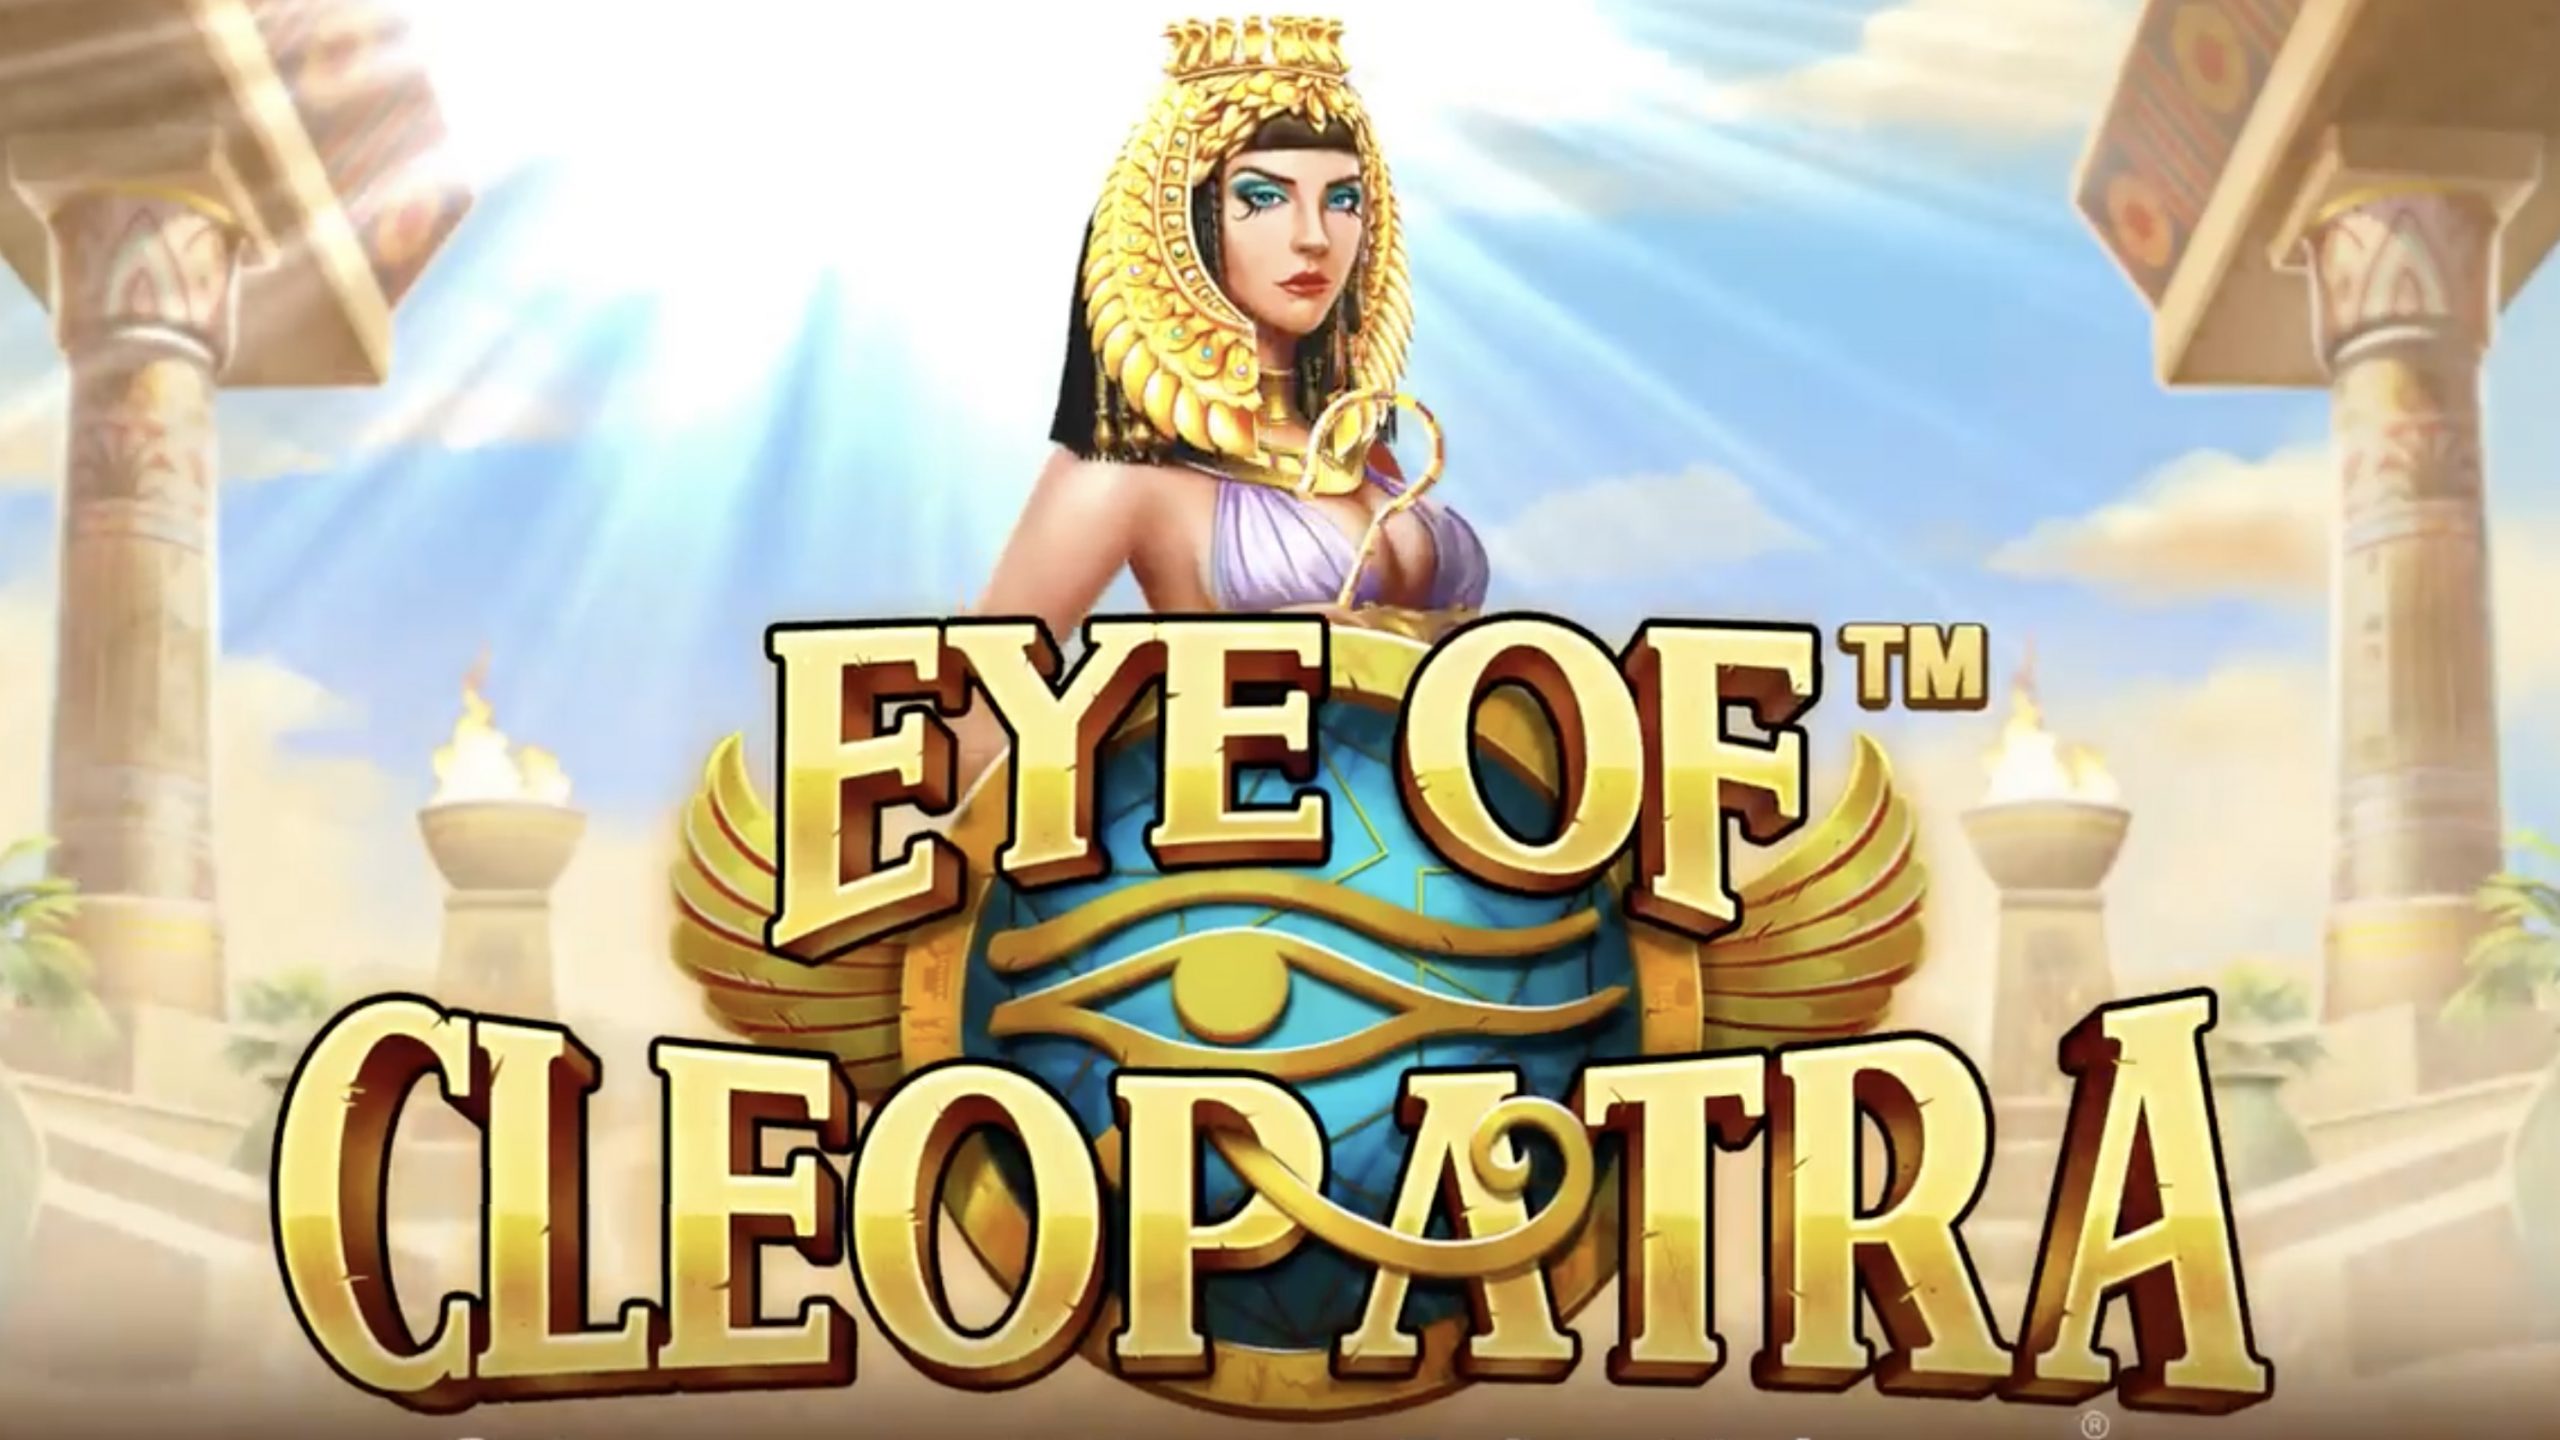 Eye of Cleopatra is a 5x4, 40-payline video slot that incorporates a maximum win potential of up to x4,000 the bet.